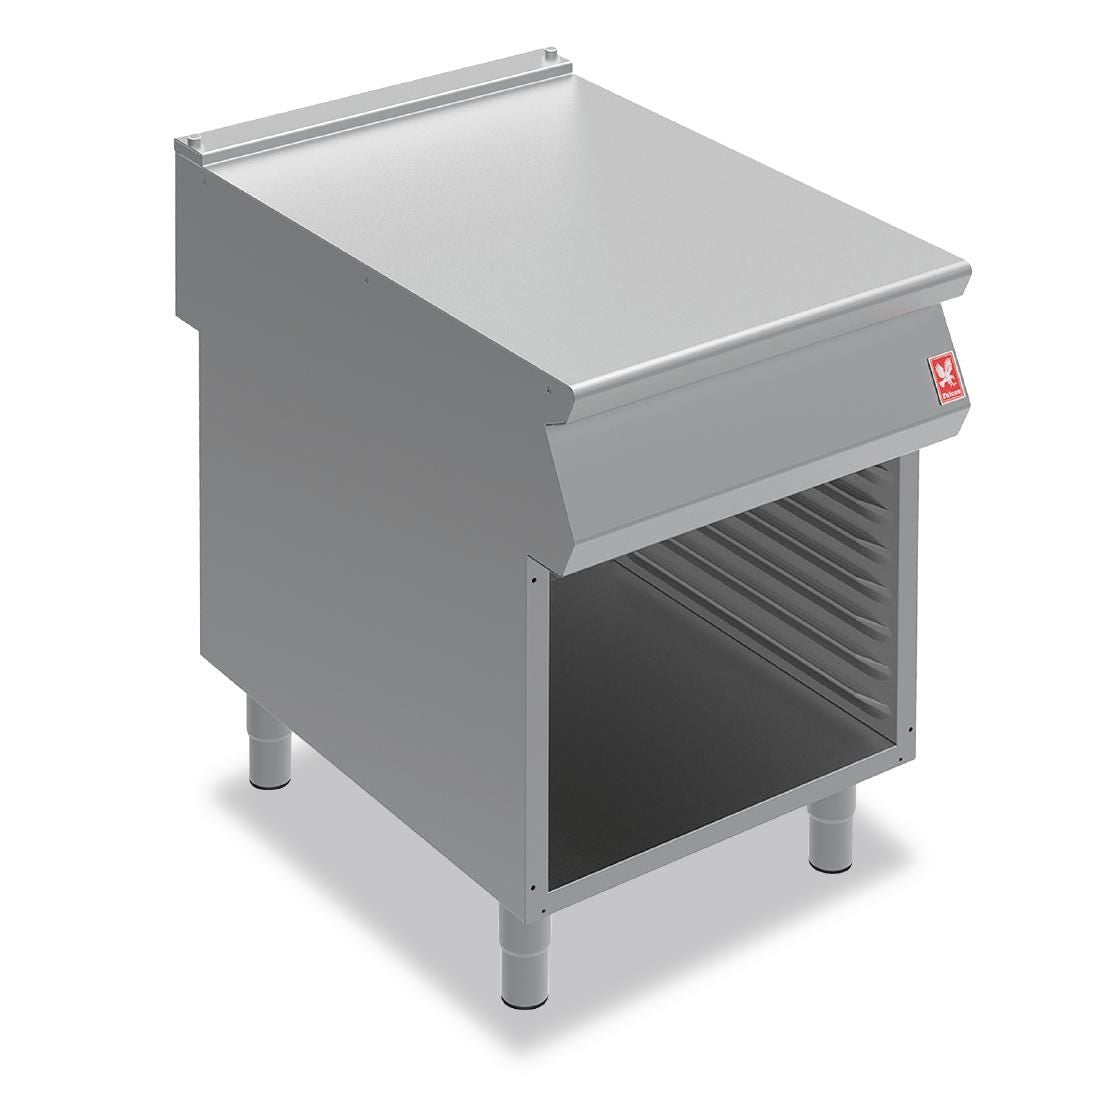 Falcon F900 Open Cabinet With Pressed Runners on Legs N961 JD Catering Equipment Solutions Ltd